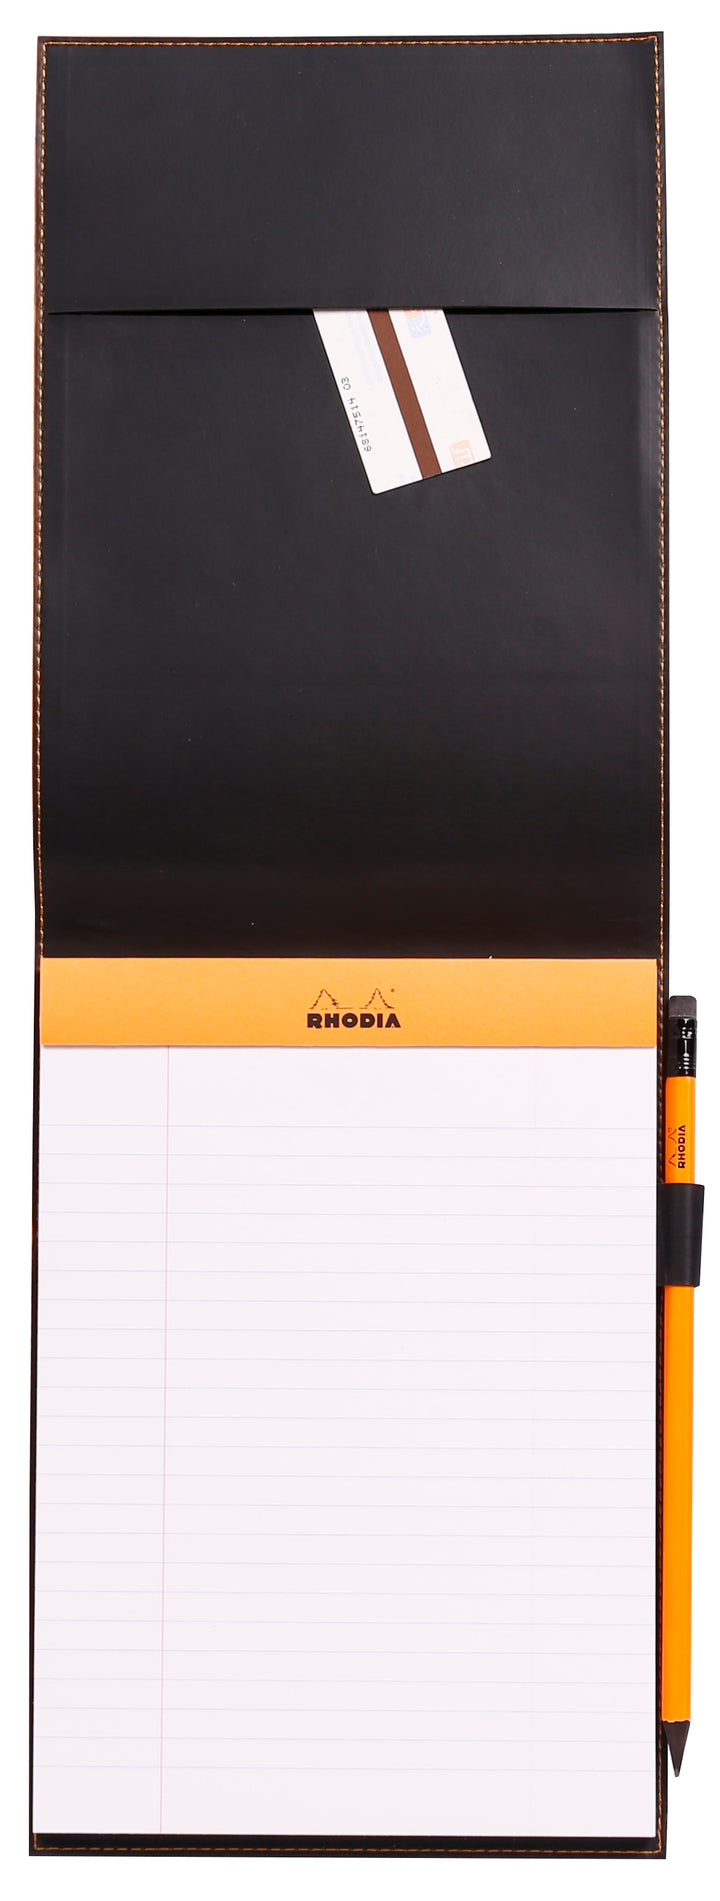 Rhodia Boutique Stapled Line Ruled Notepad with Leatherette Cover - A5